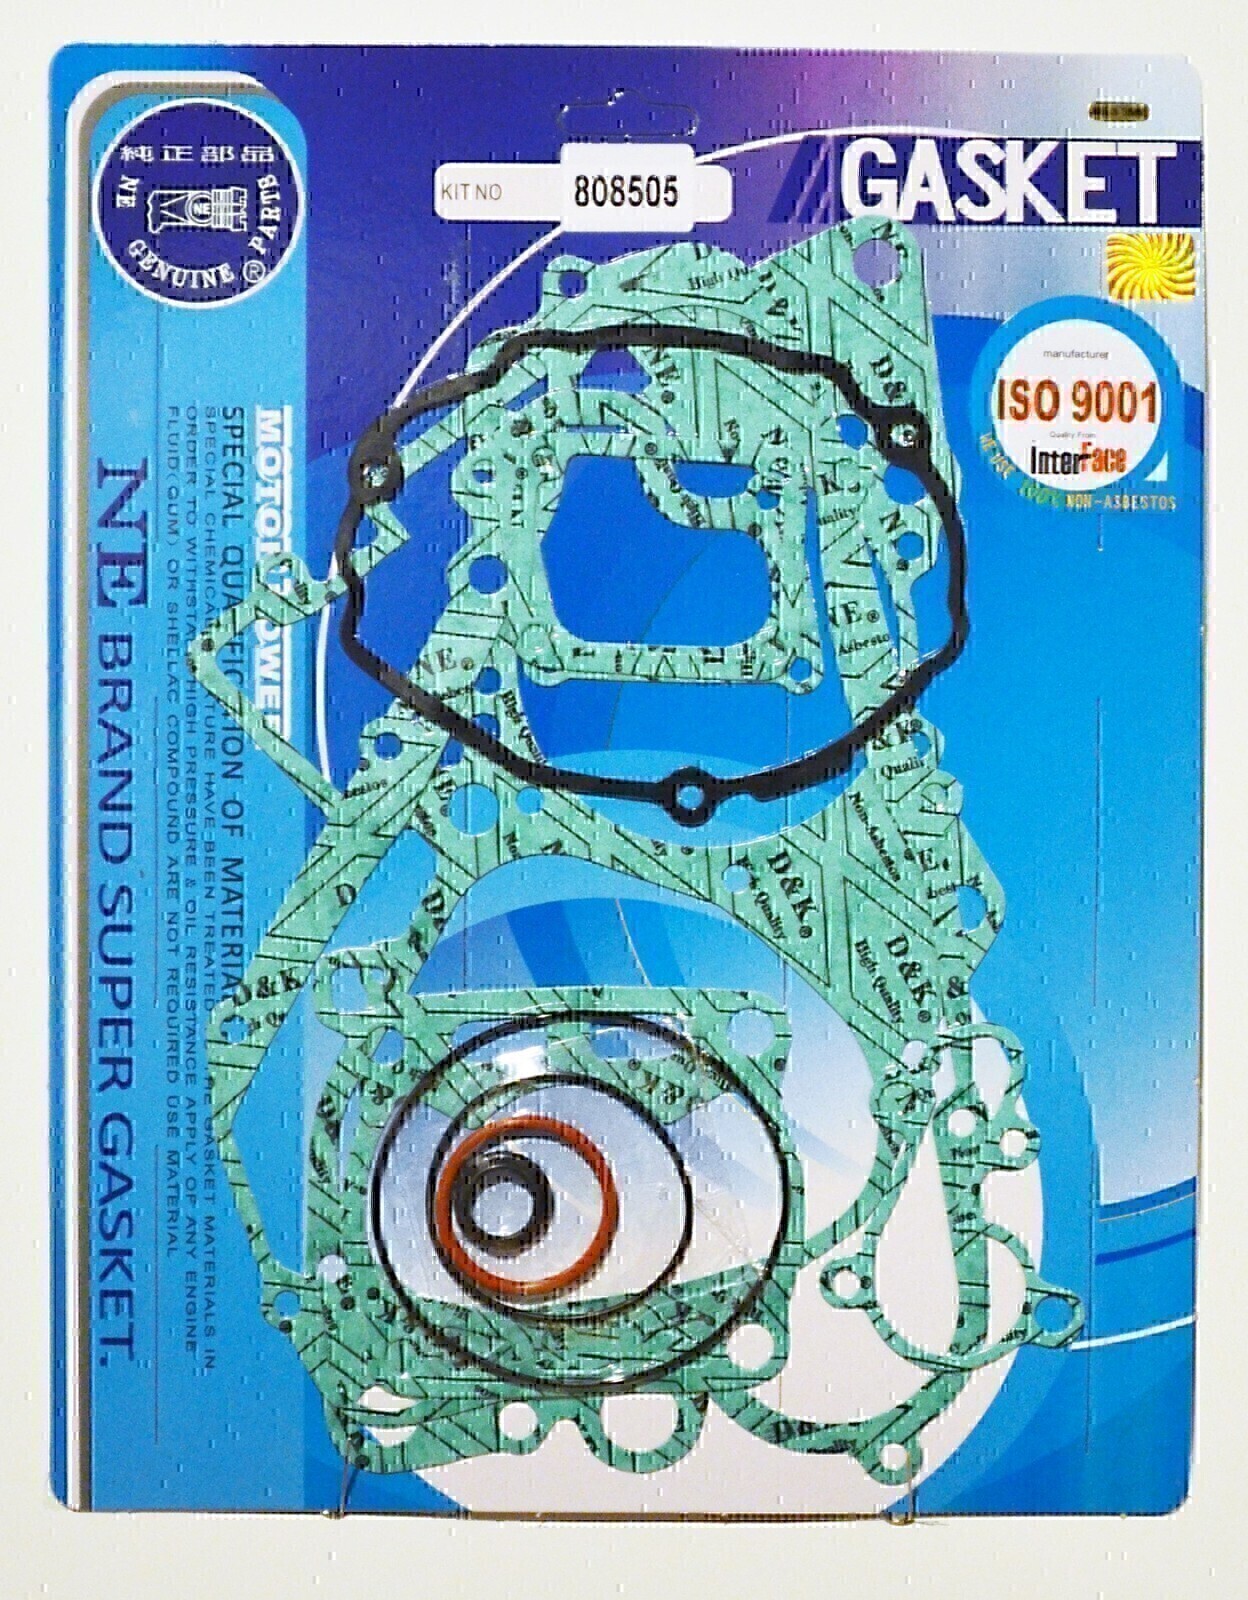 COMPLETE GASKET KIT FOR SUZUKI RM85 RM 85 2002 - 2015